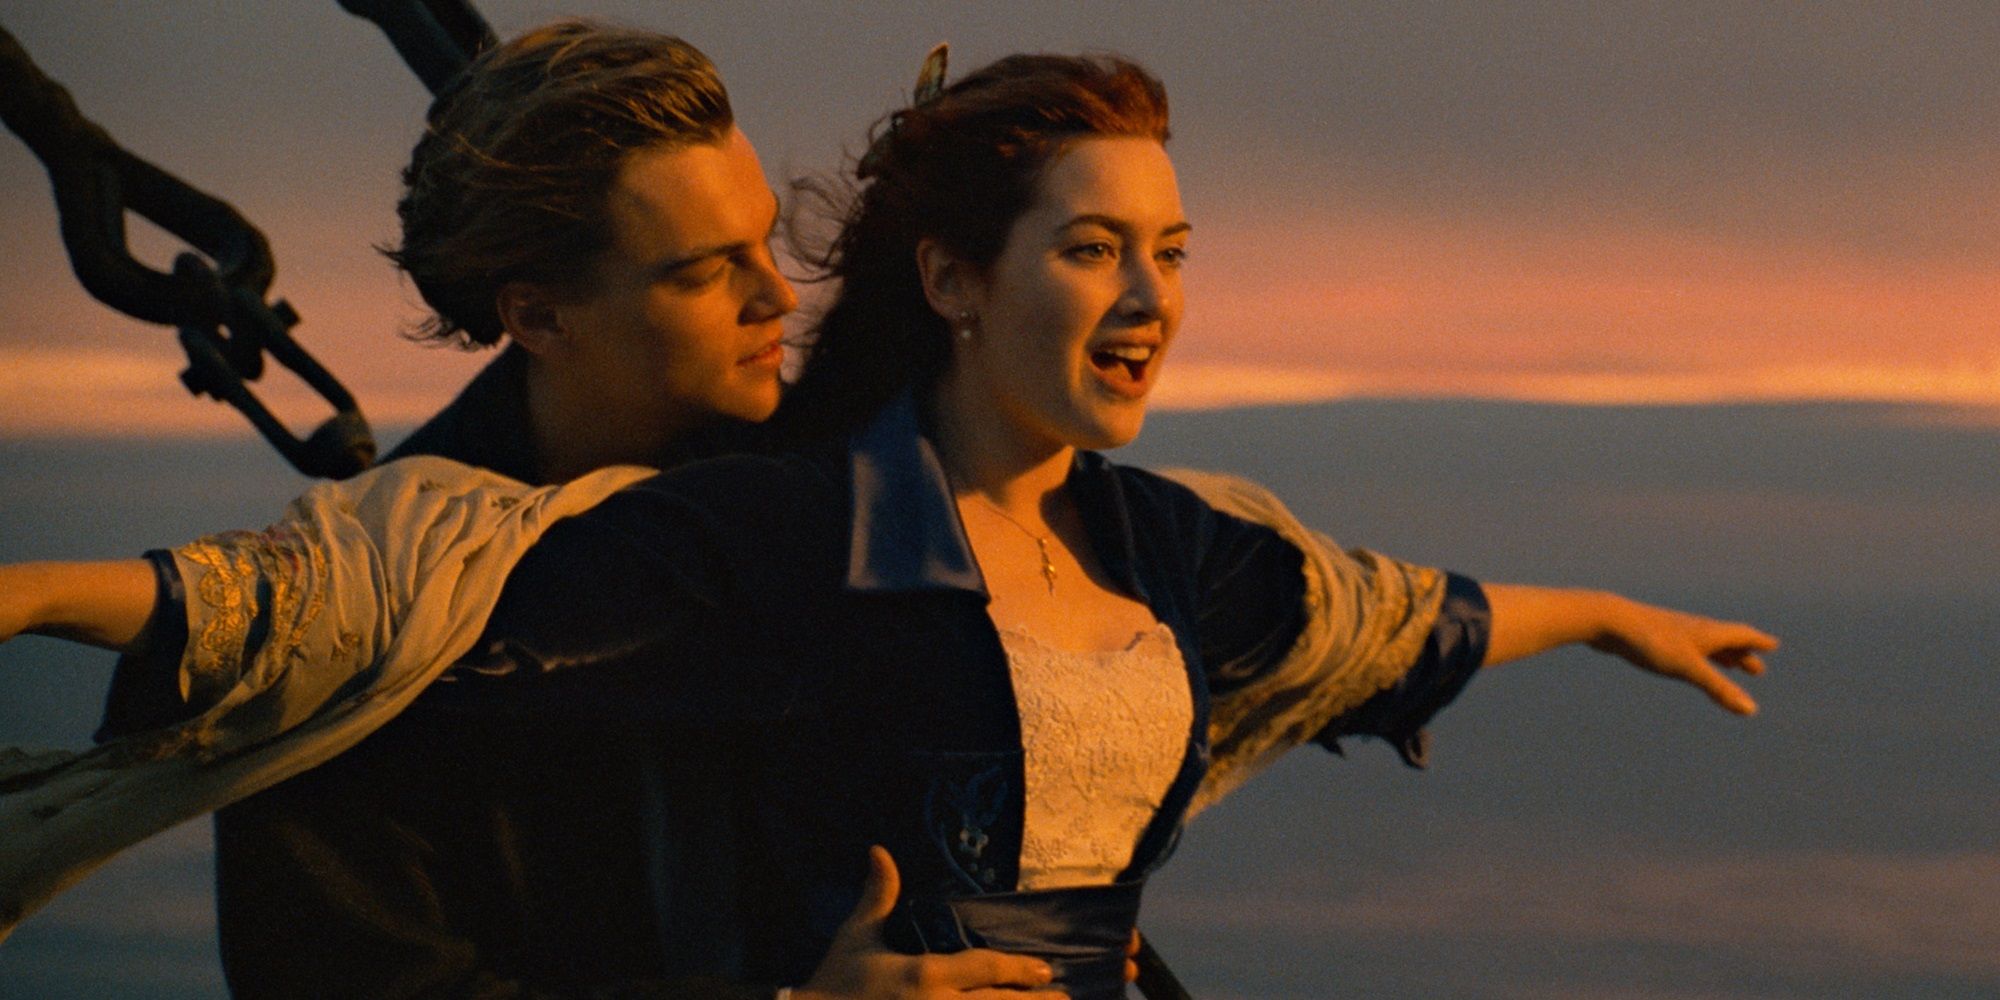 Jack and Rose on the boat in Titanic